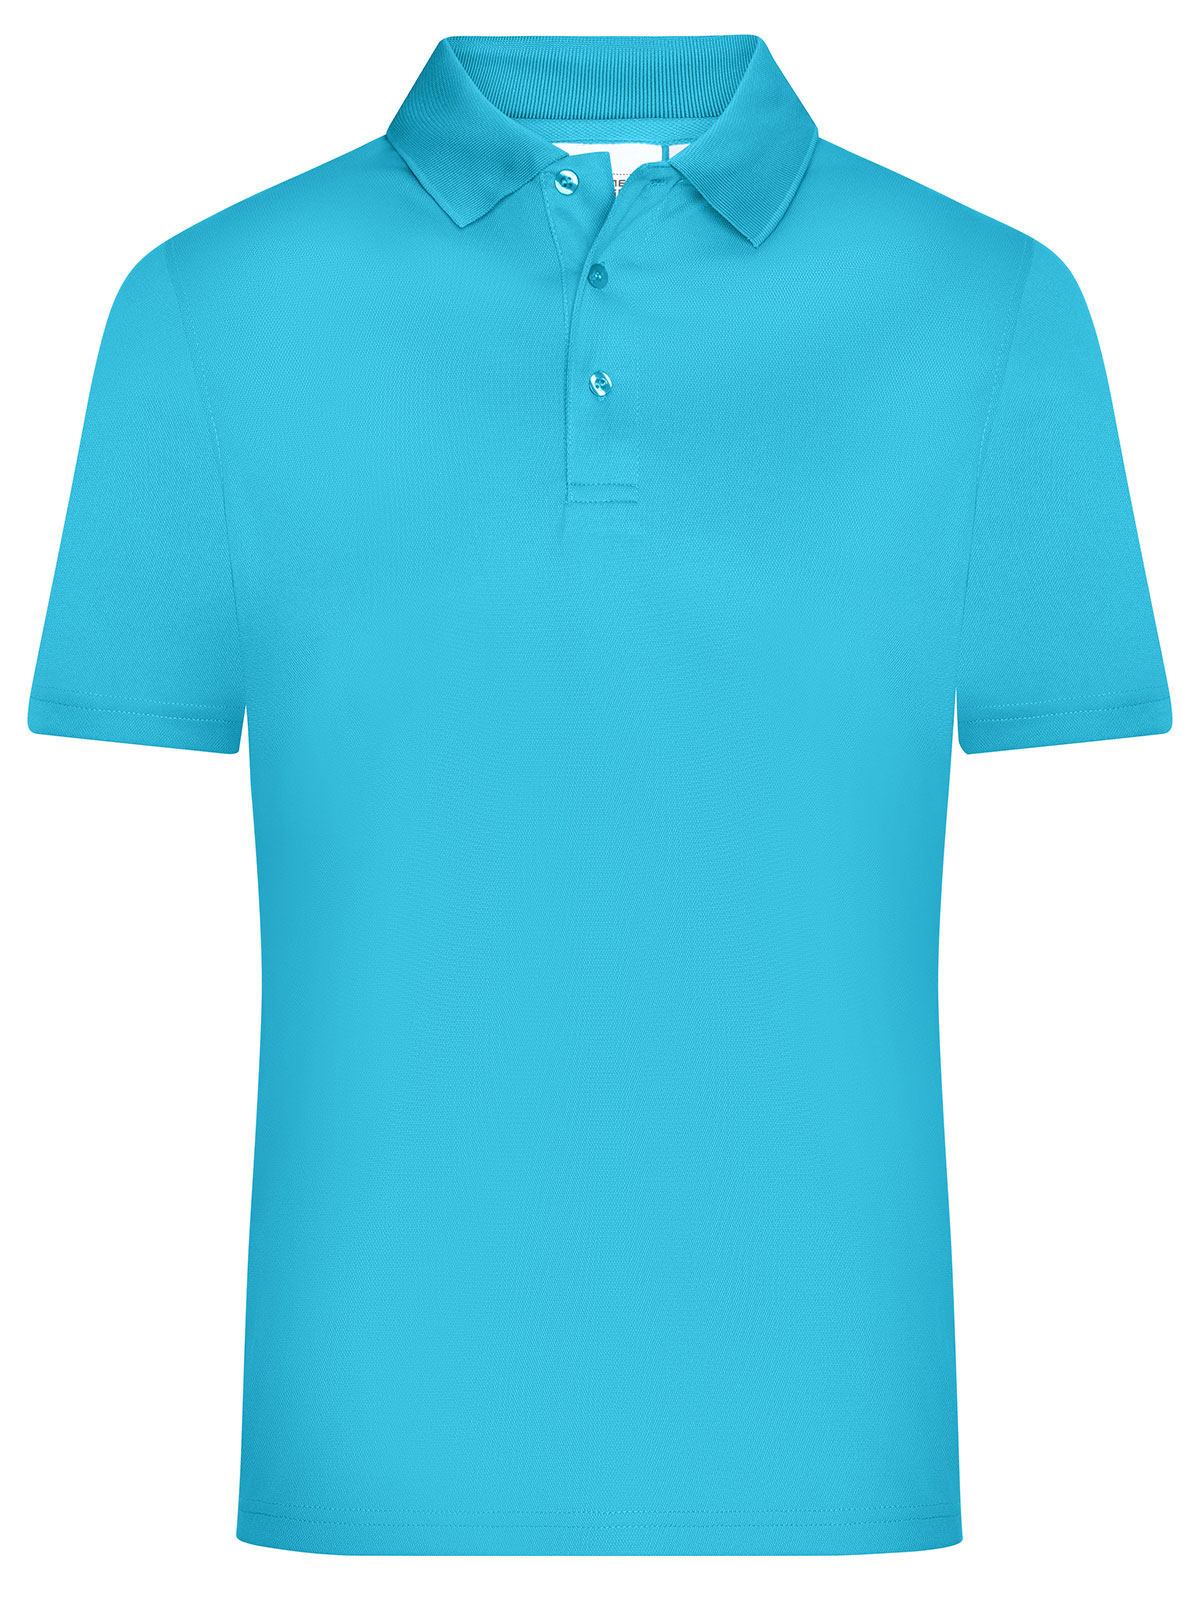 mens-active-polo-turquoise.webp